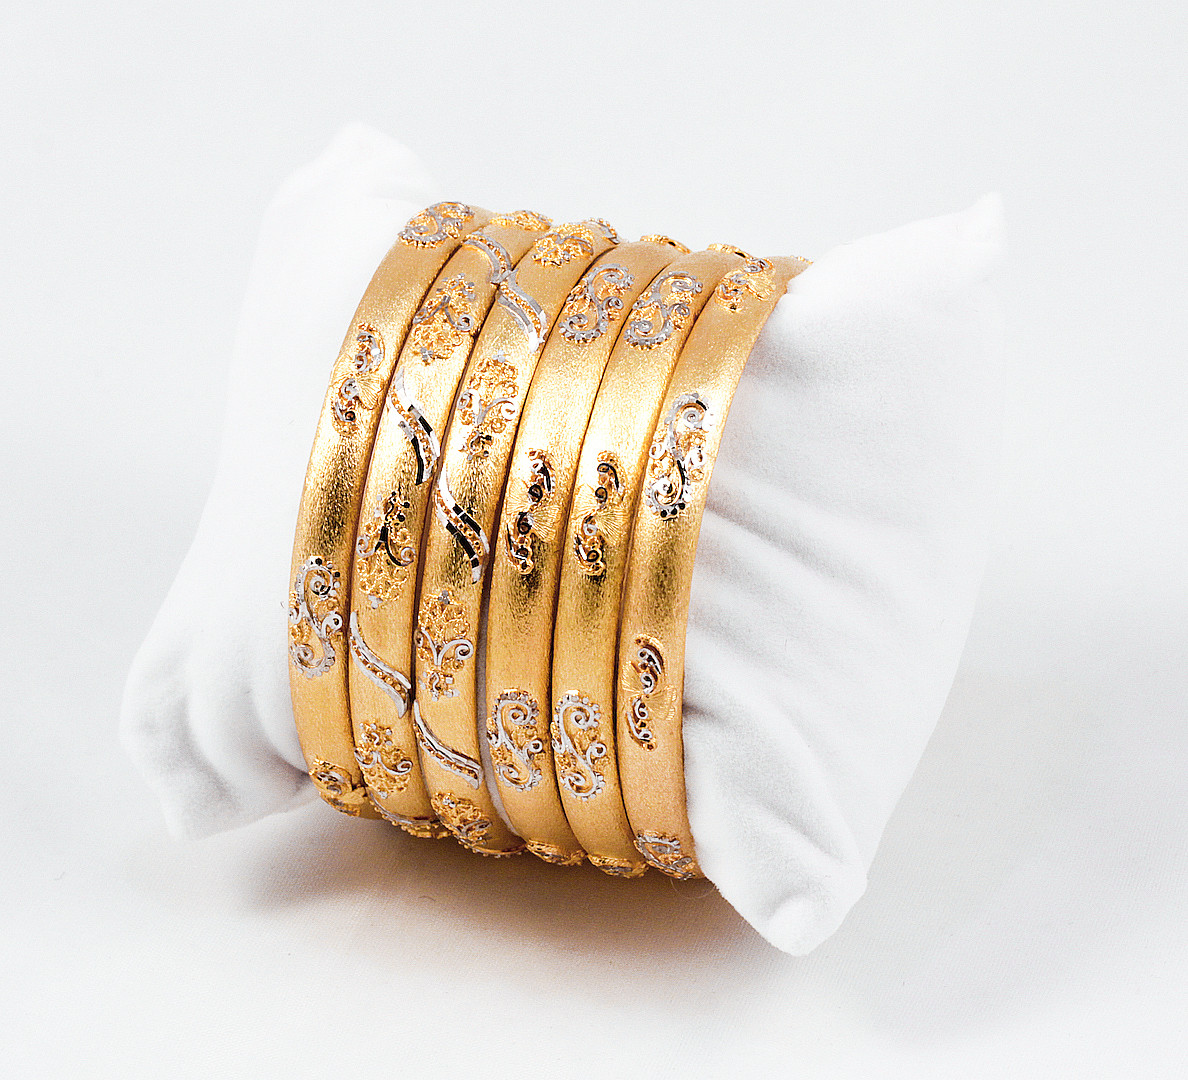 YELLOW GOLD BANGLES, SET OF 6, 21K, Size: x-Large, Weight: 87.7g ...